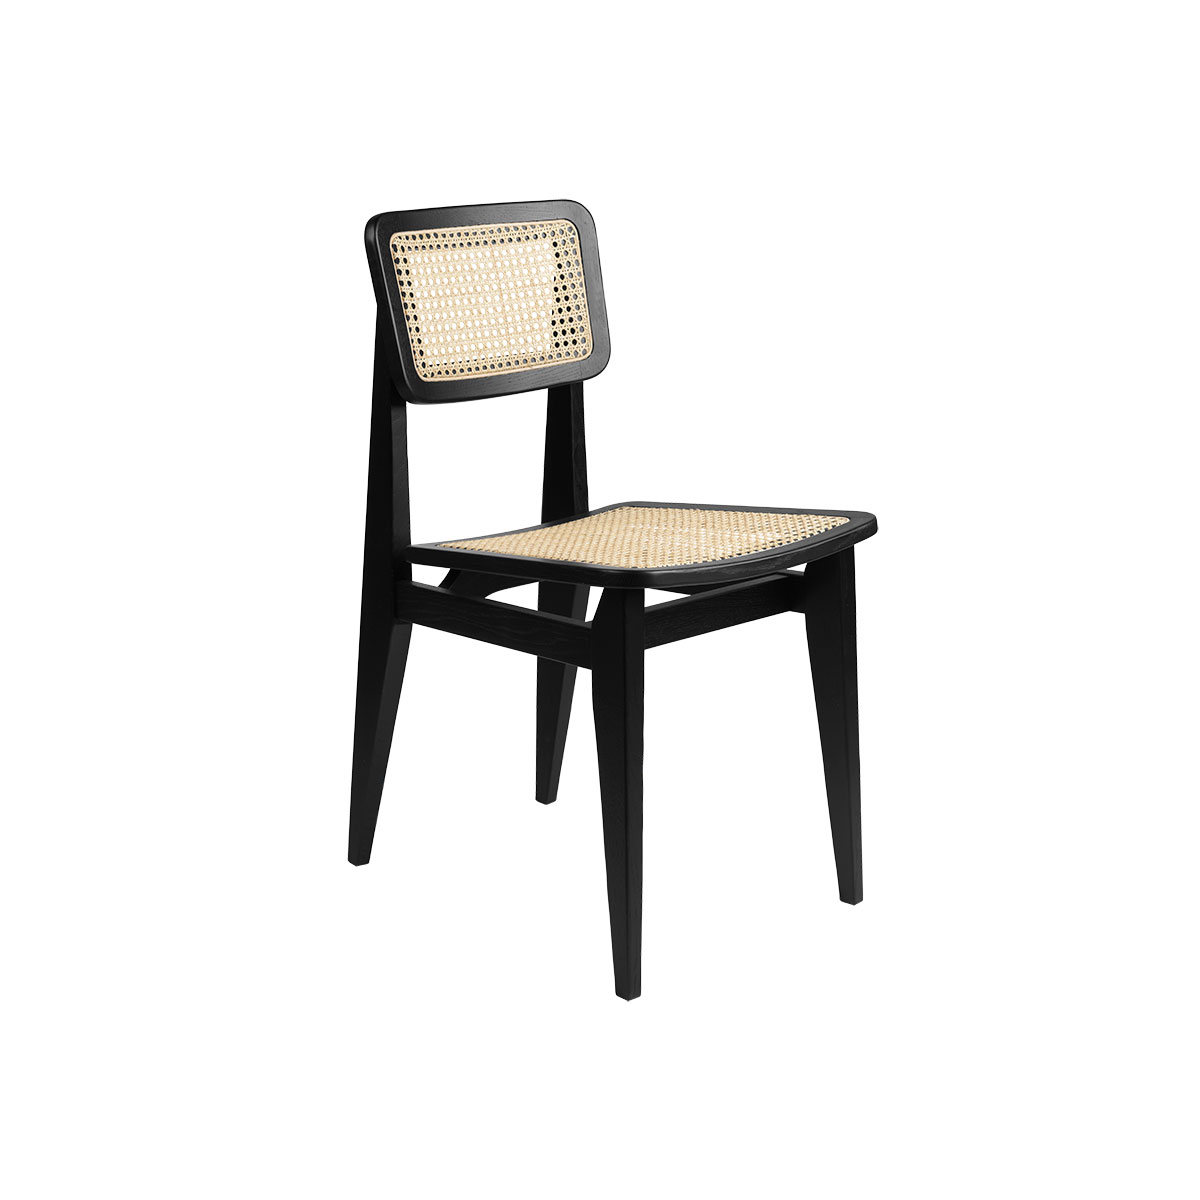 C-Chair French Cane/Black Stained Oak